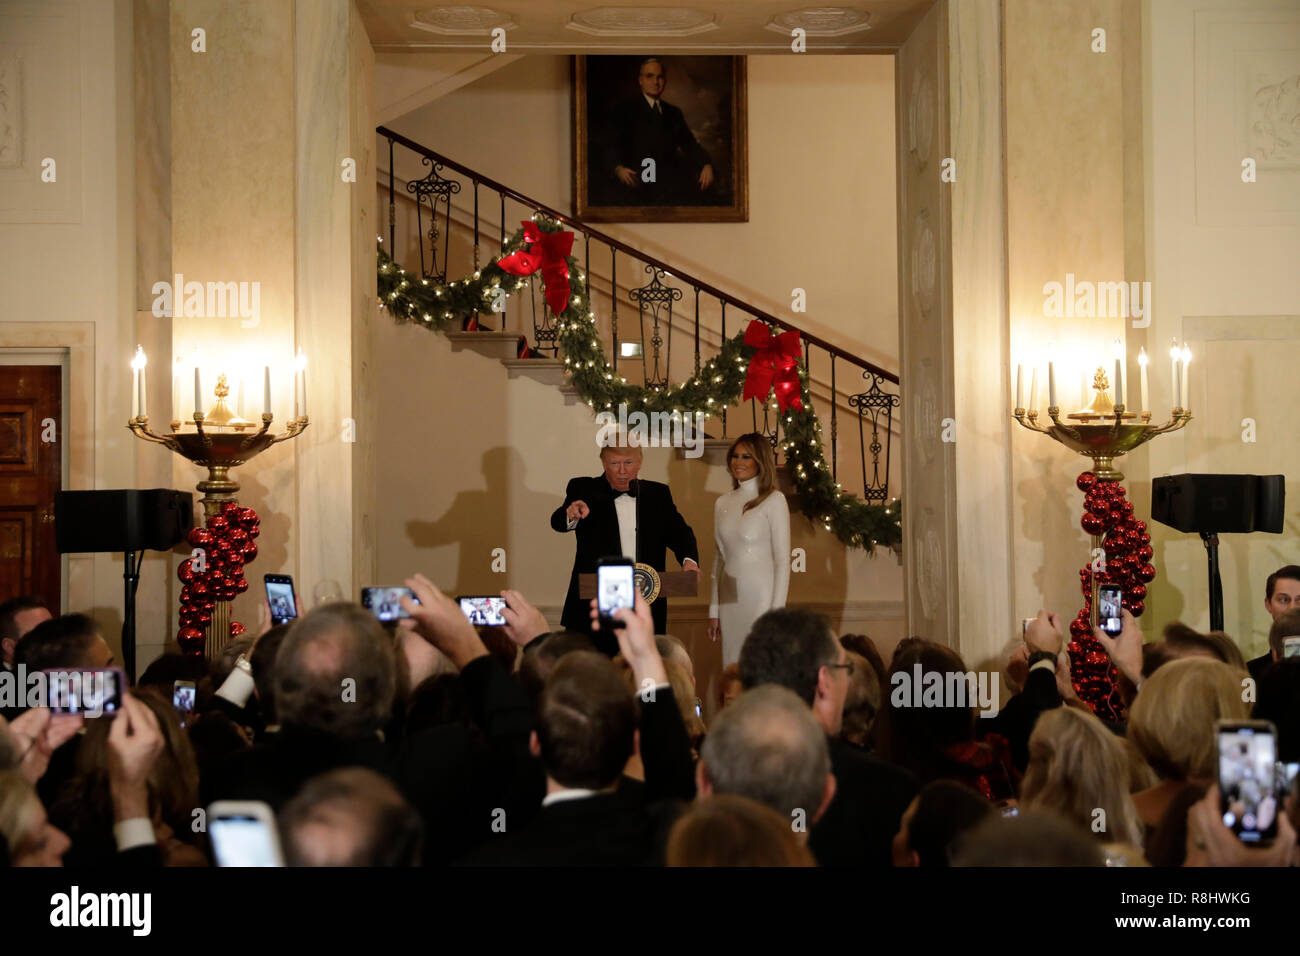 United States President Donald J. Trump makes remarks as First lady Melania Trump looks on at the Congressional Ball at White House in Washington, DC on December 15, 2018. Credit: Yuri Gripas/Pool via CNP/MediaPunch Stock Photo